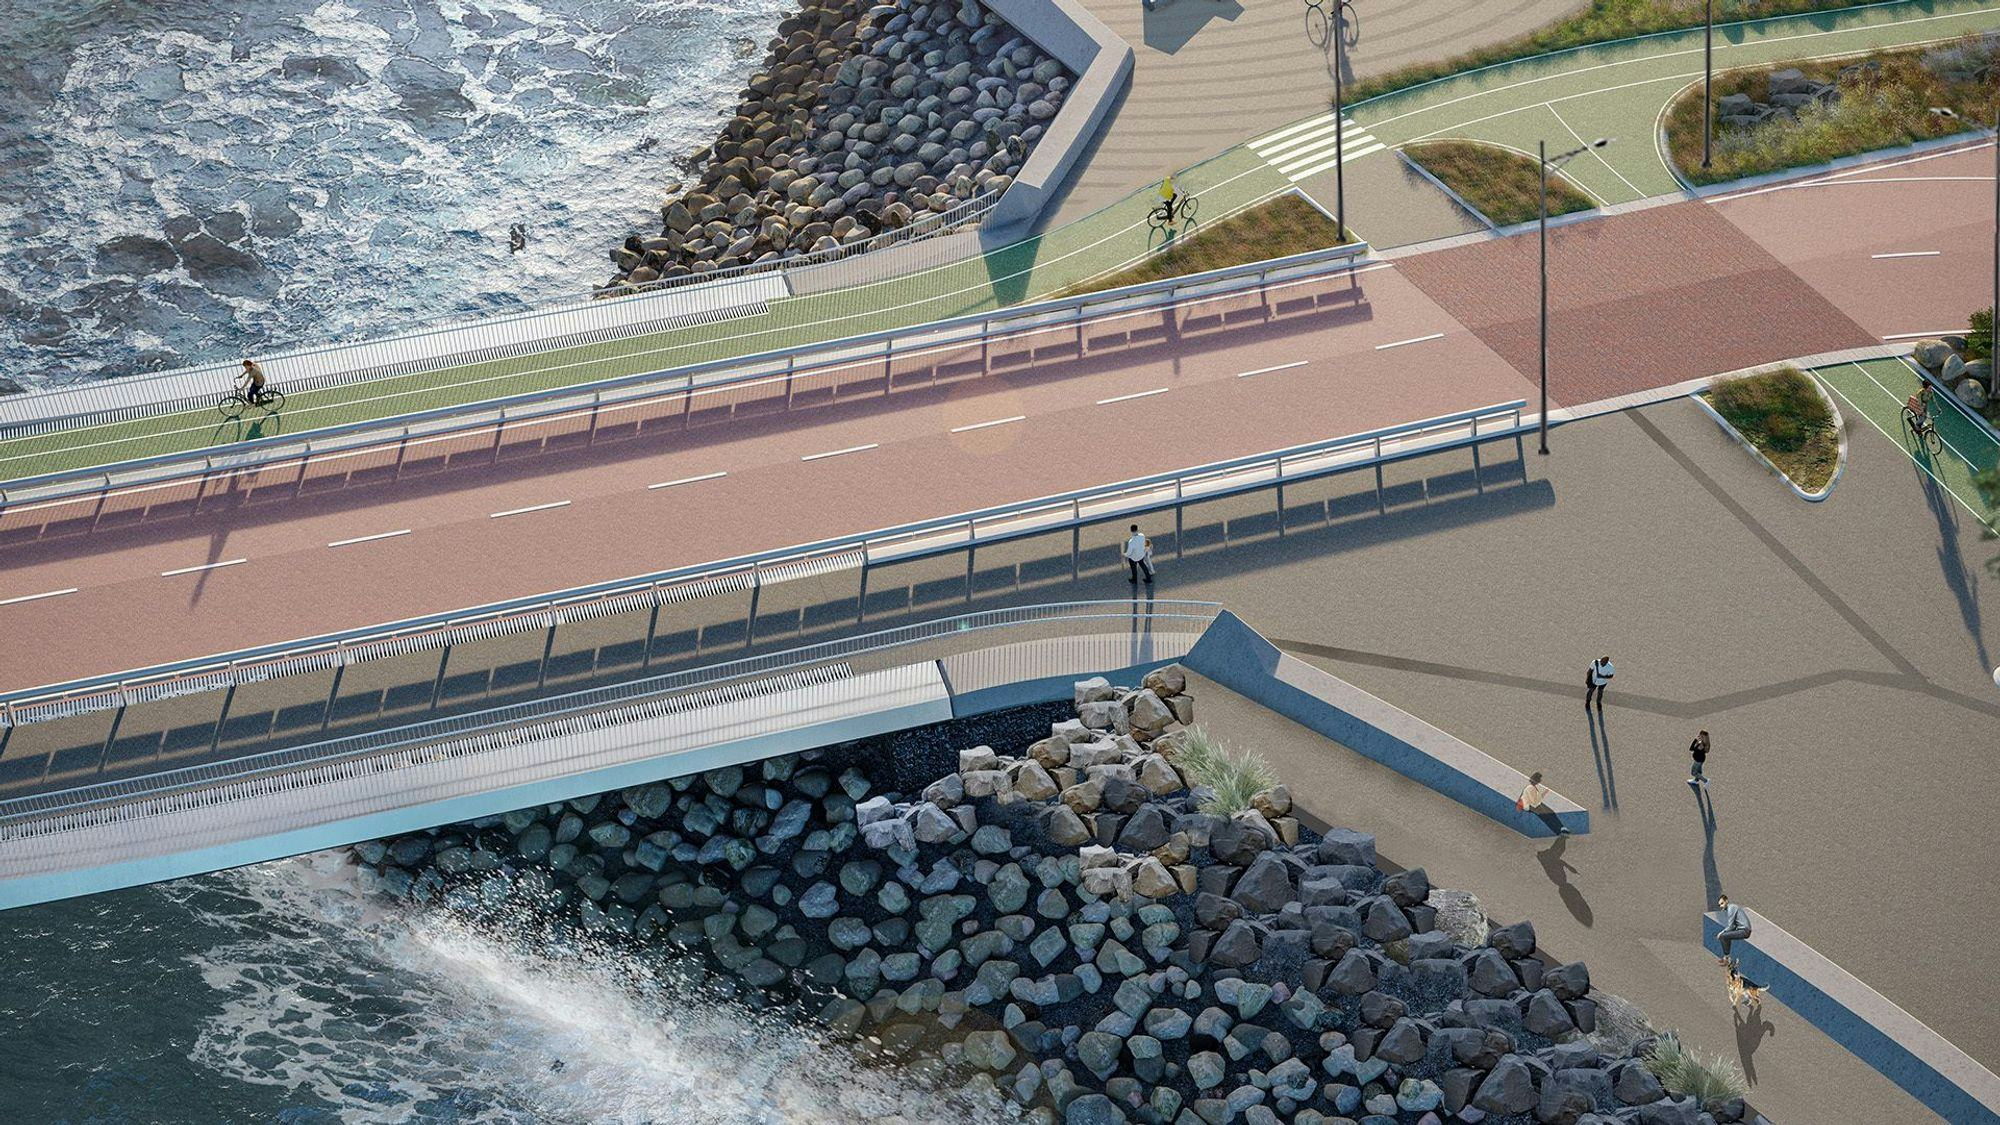 3D picture of coastal path with cyclist and pedestrians